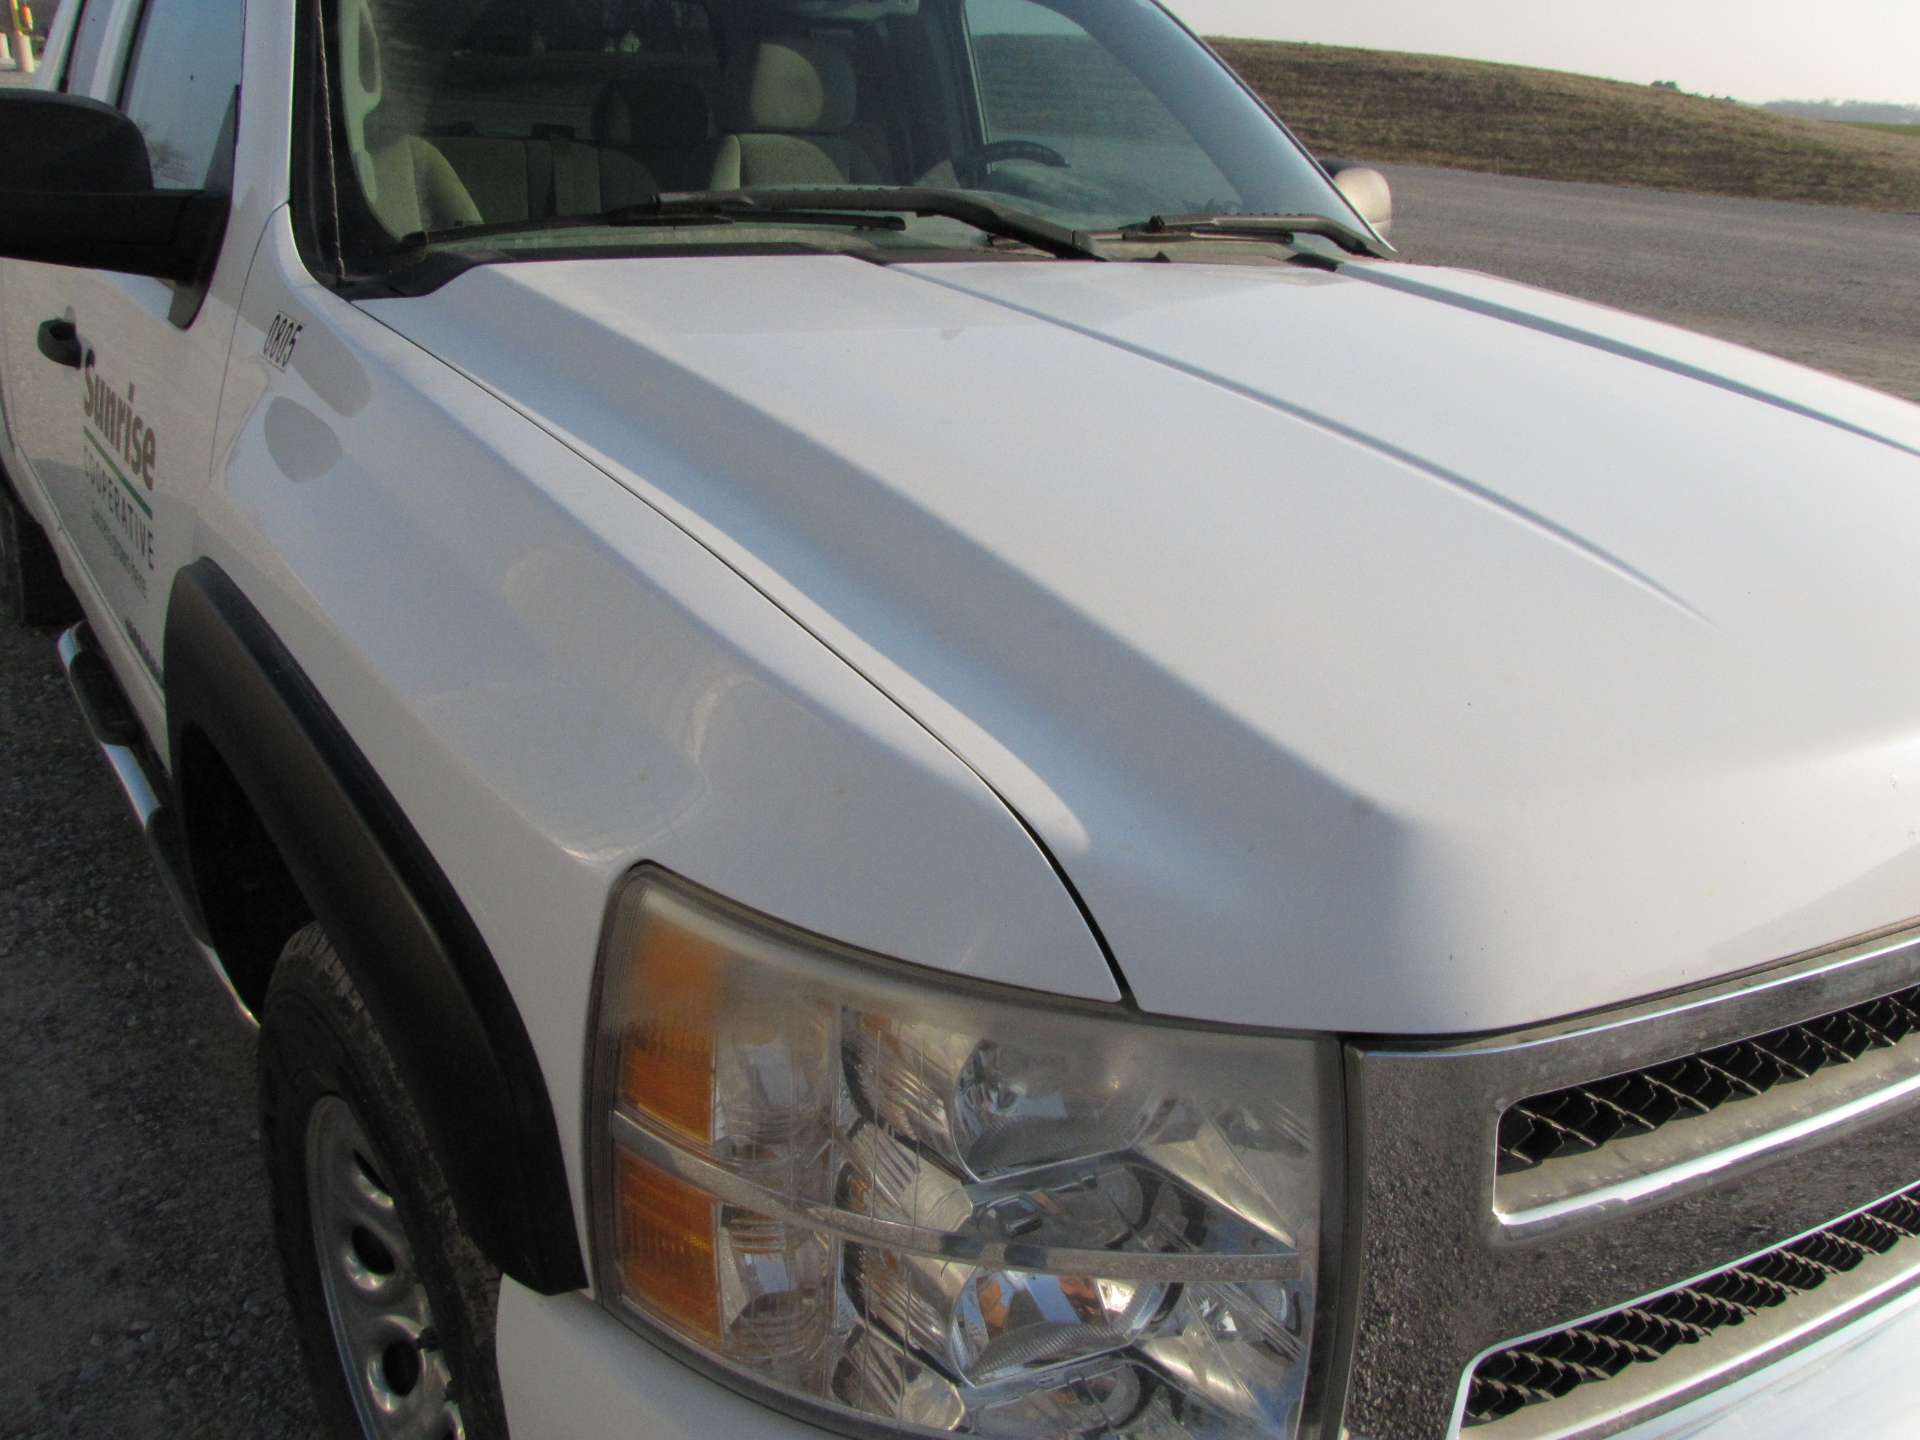 2008 Chevy Silverado 1500 LT Pickup Truck (CRACKED FRAME) - Image 35 of 43